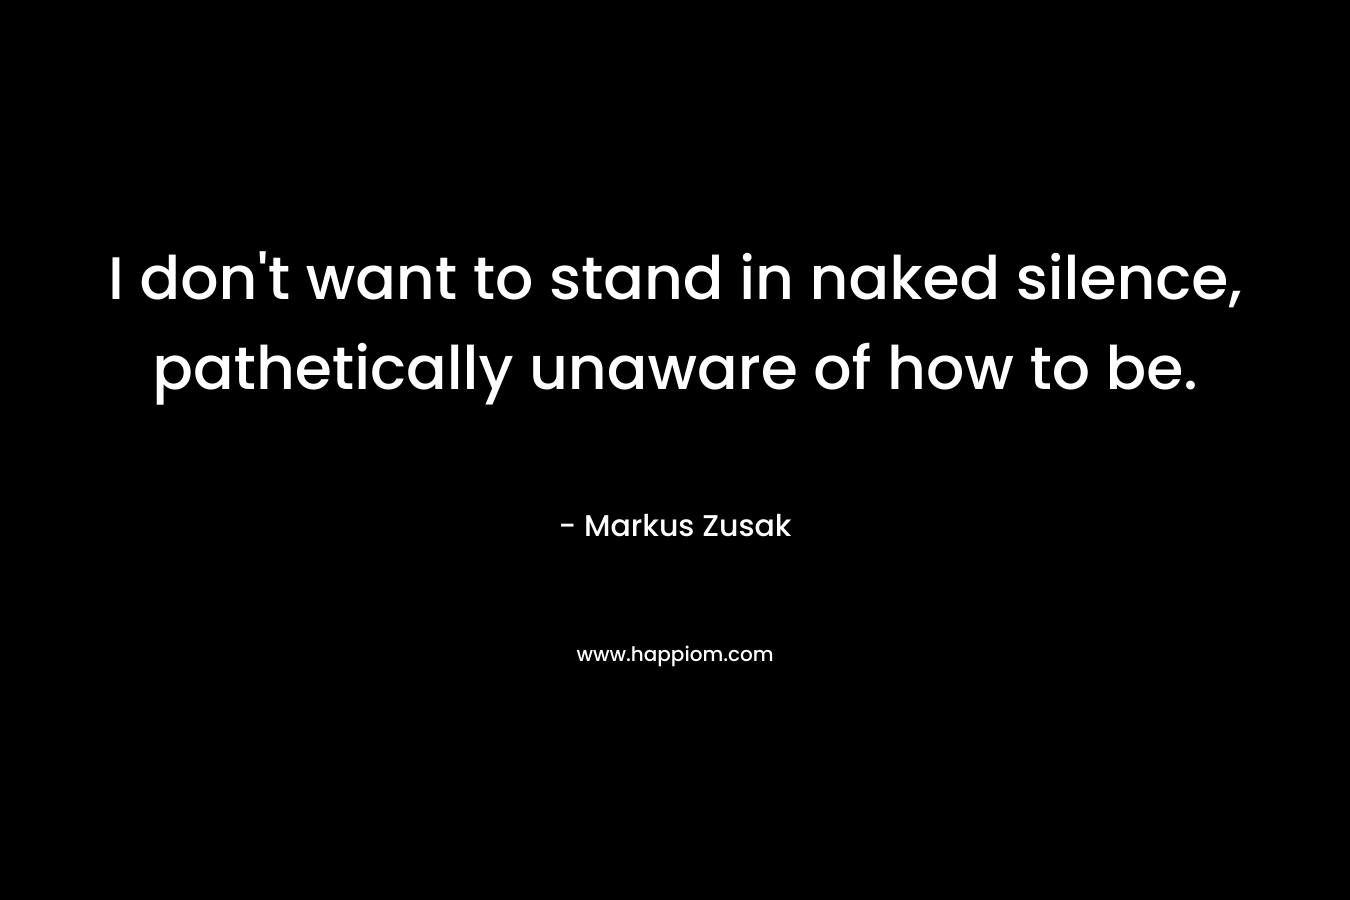 I don't want to stand in naked silence, pathetically unaware of how to be.